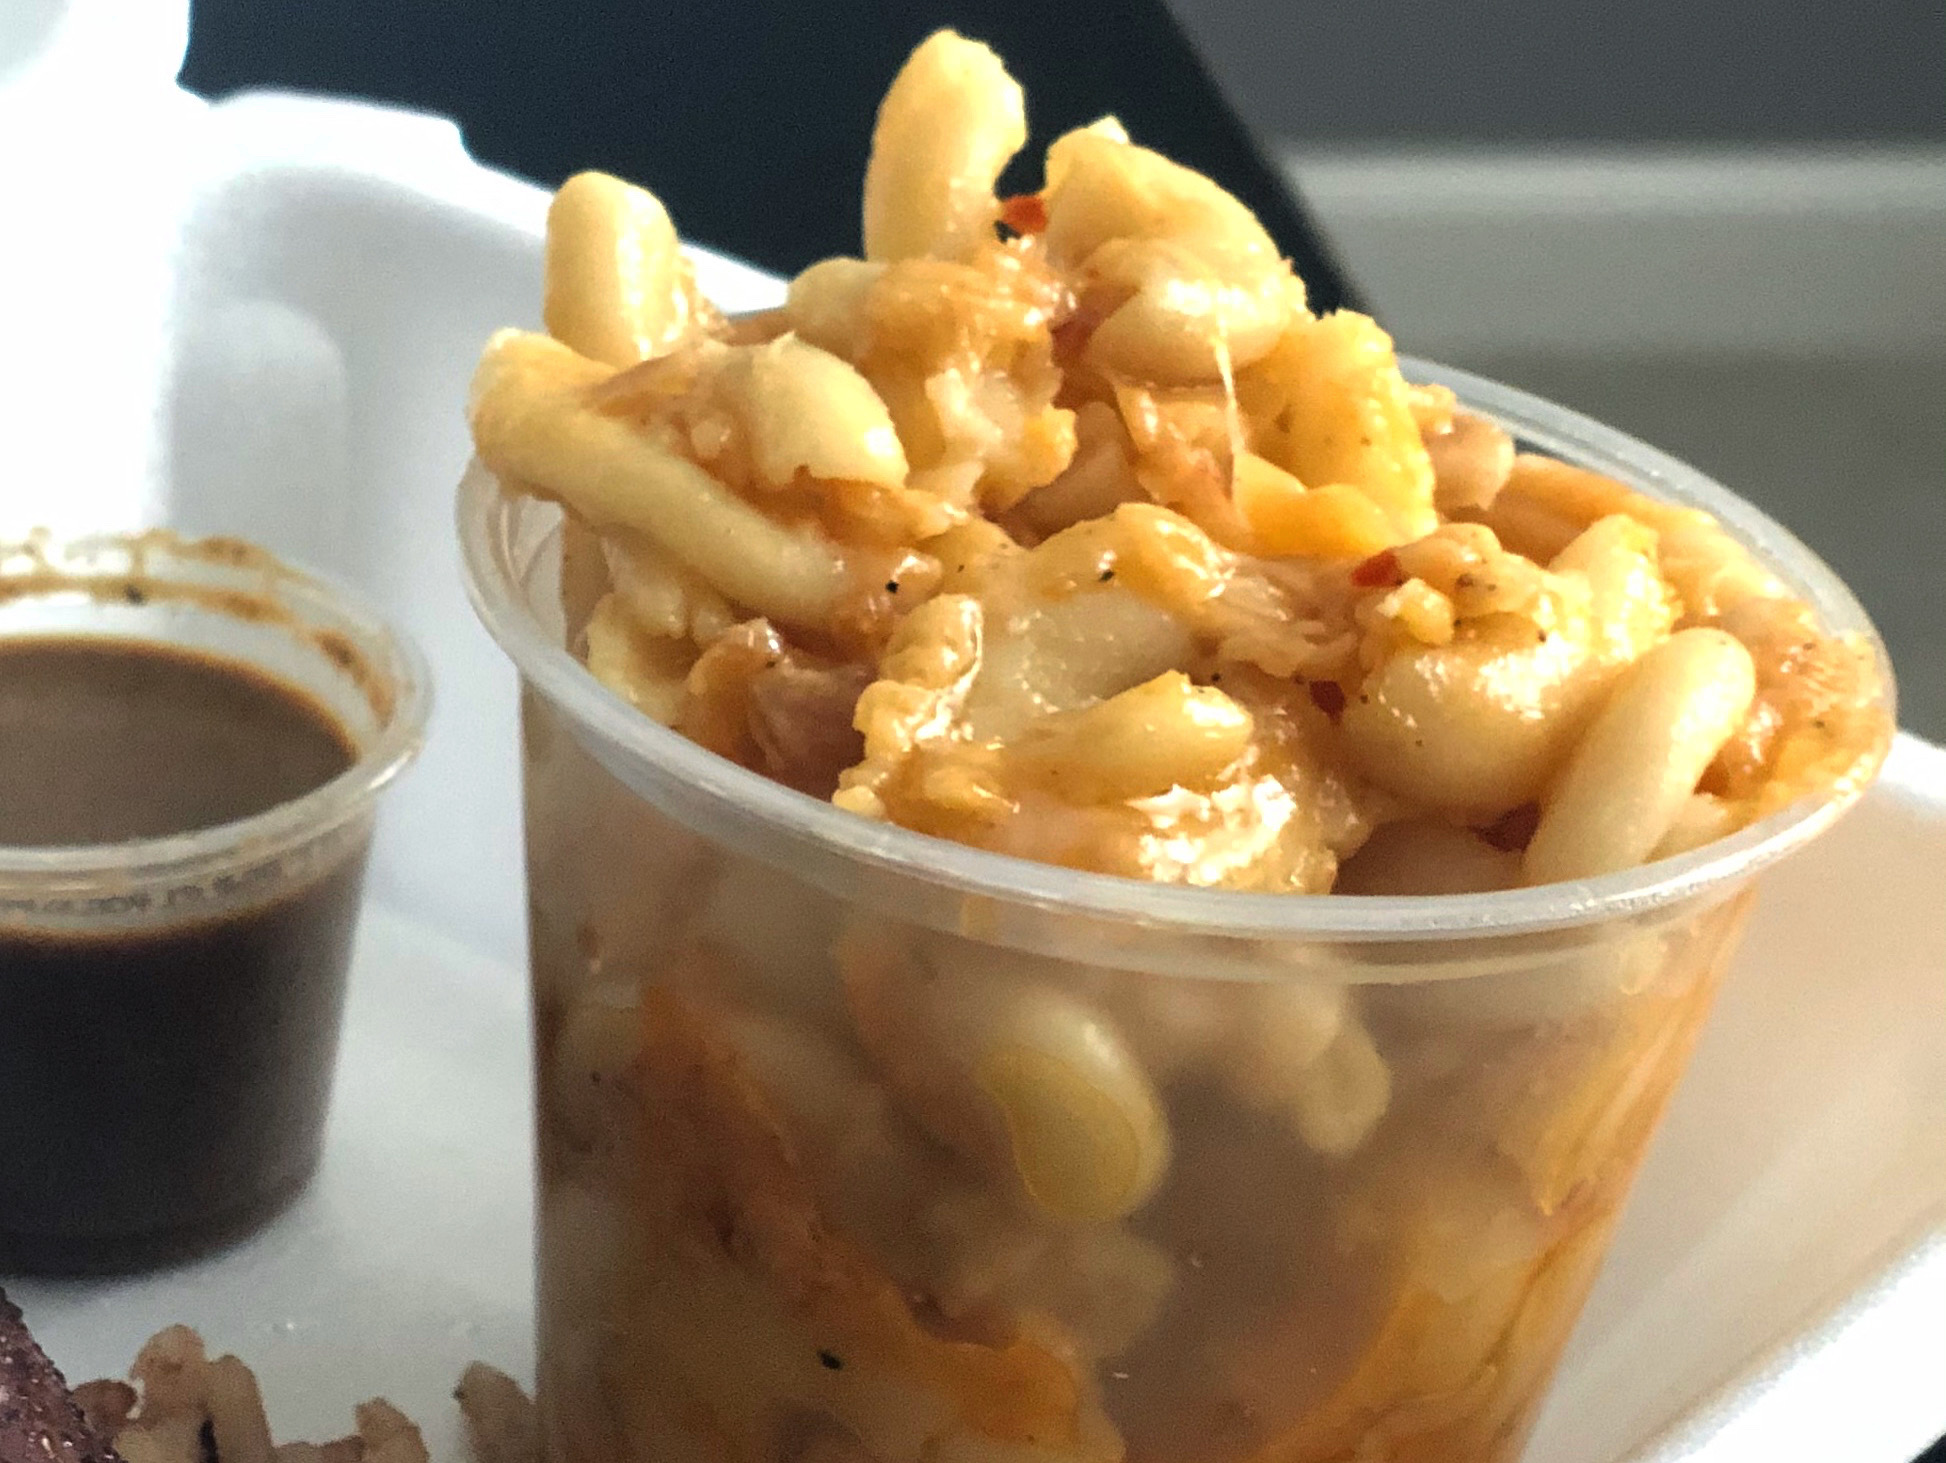 A tall, small plastic cup holds macaroni and cheese from Caribbean Grill in a styrofoam container with a small side cup of jerk sauce behind it. Photo by Alyssa Buckley.